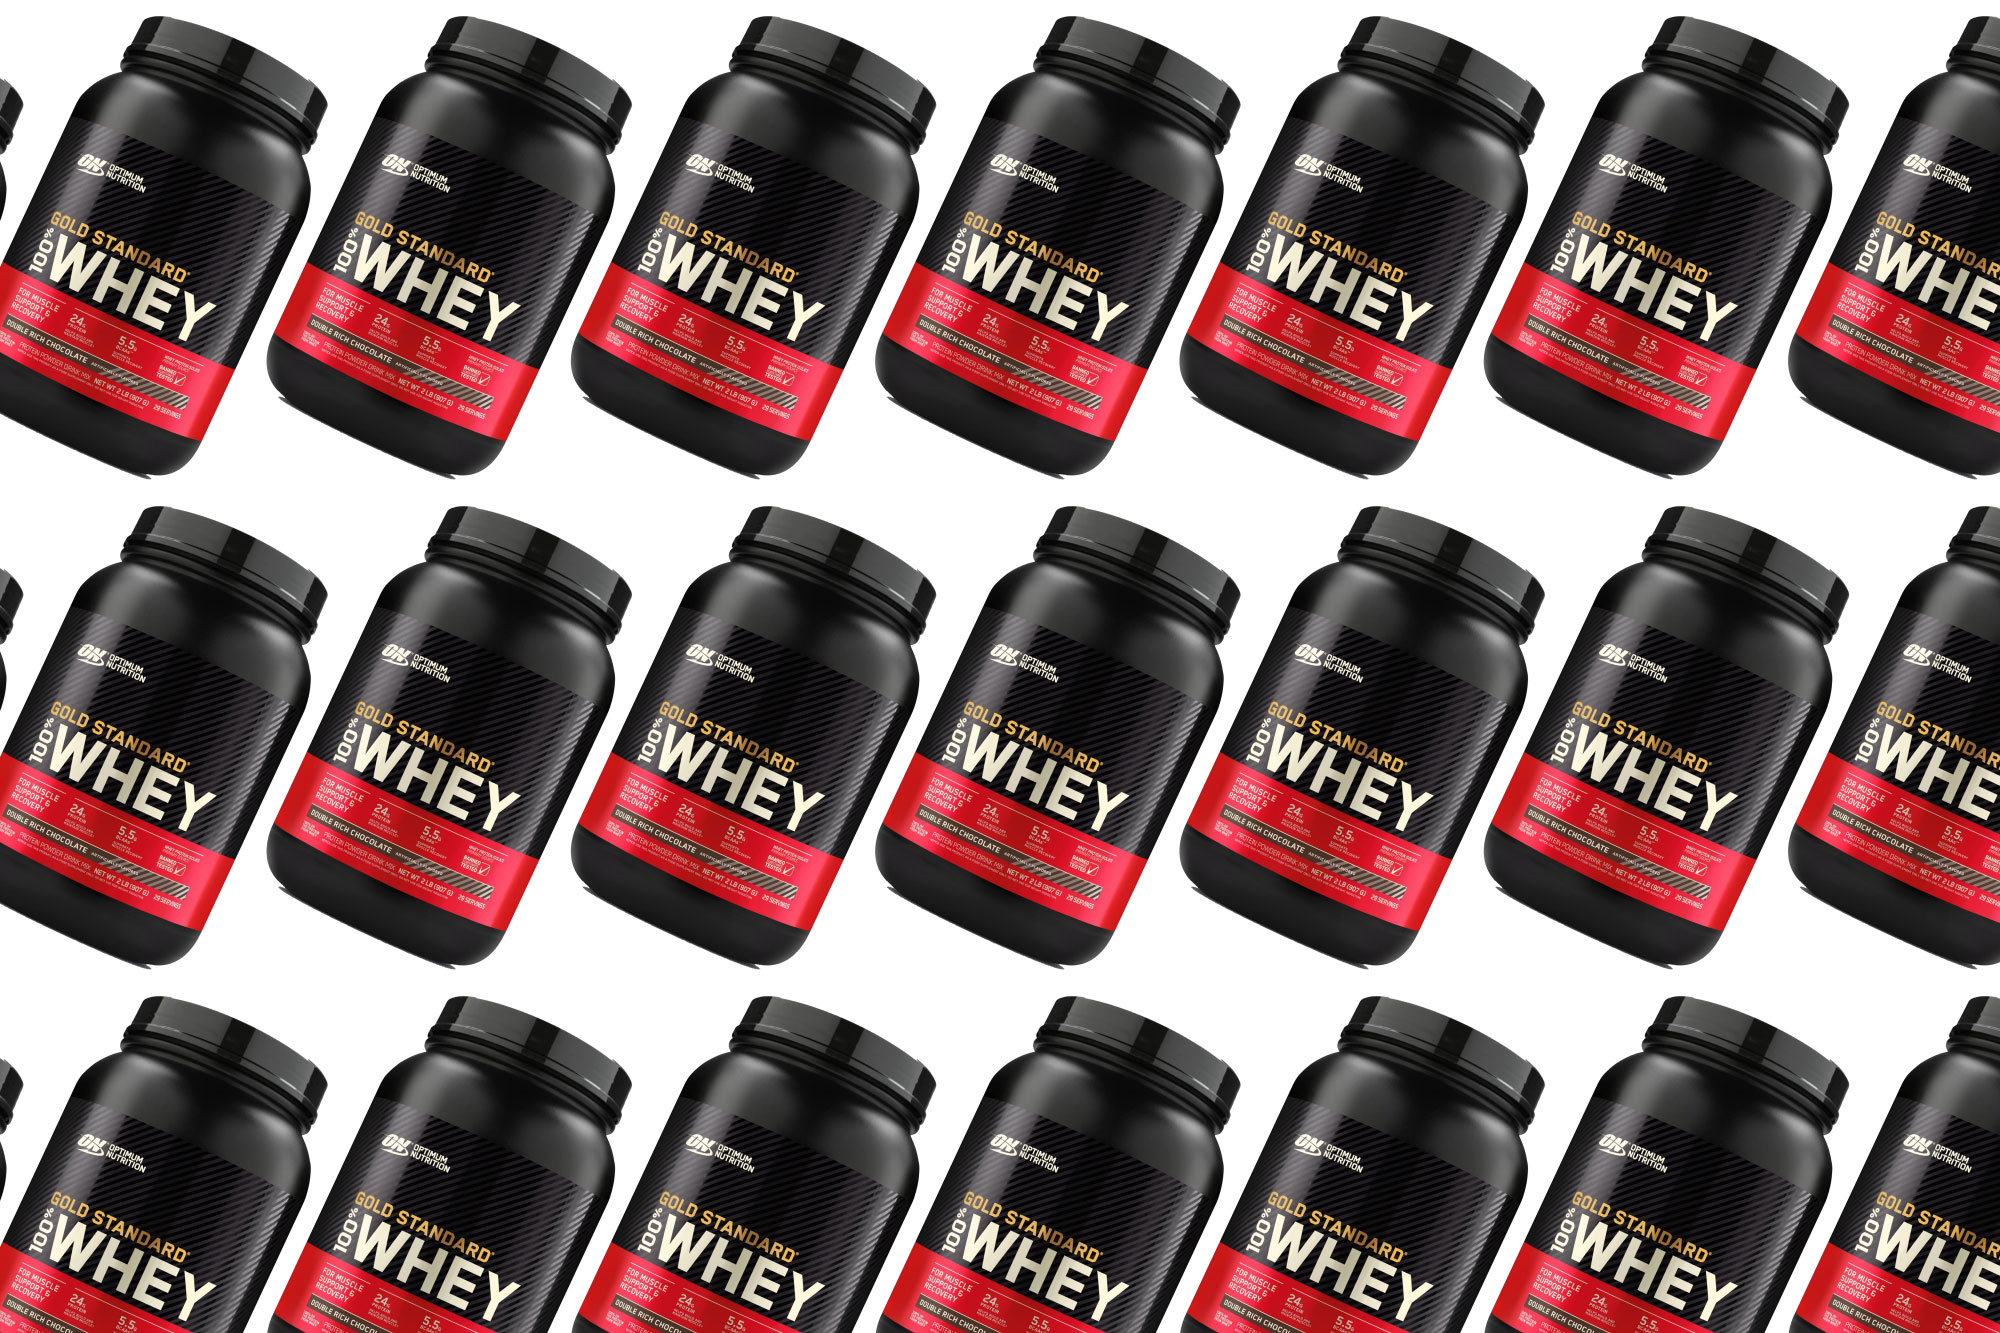 A container of Optimum Nutrition Gold Standard protein powder on a plain background.